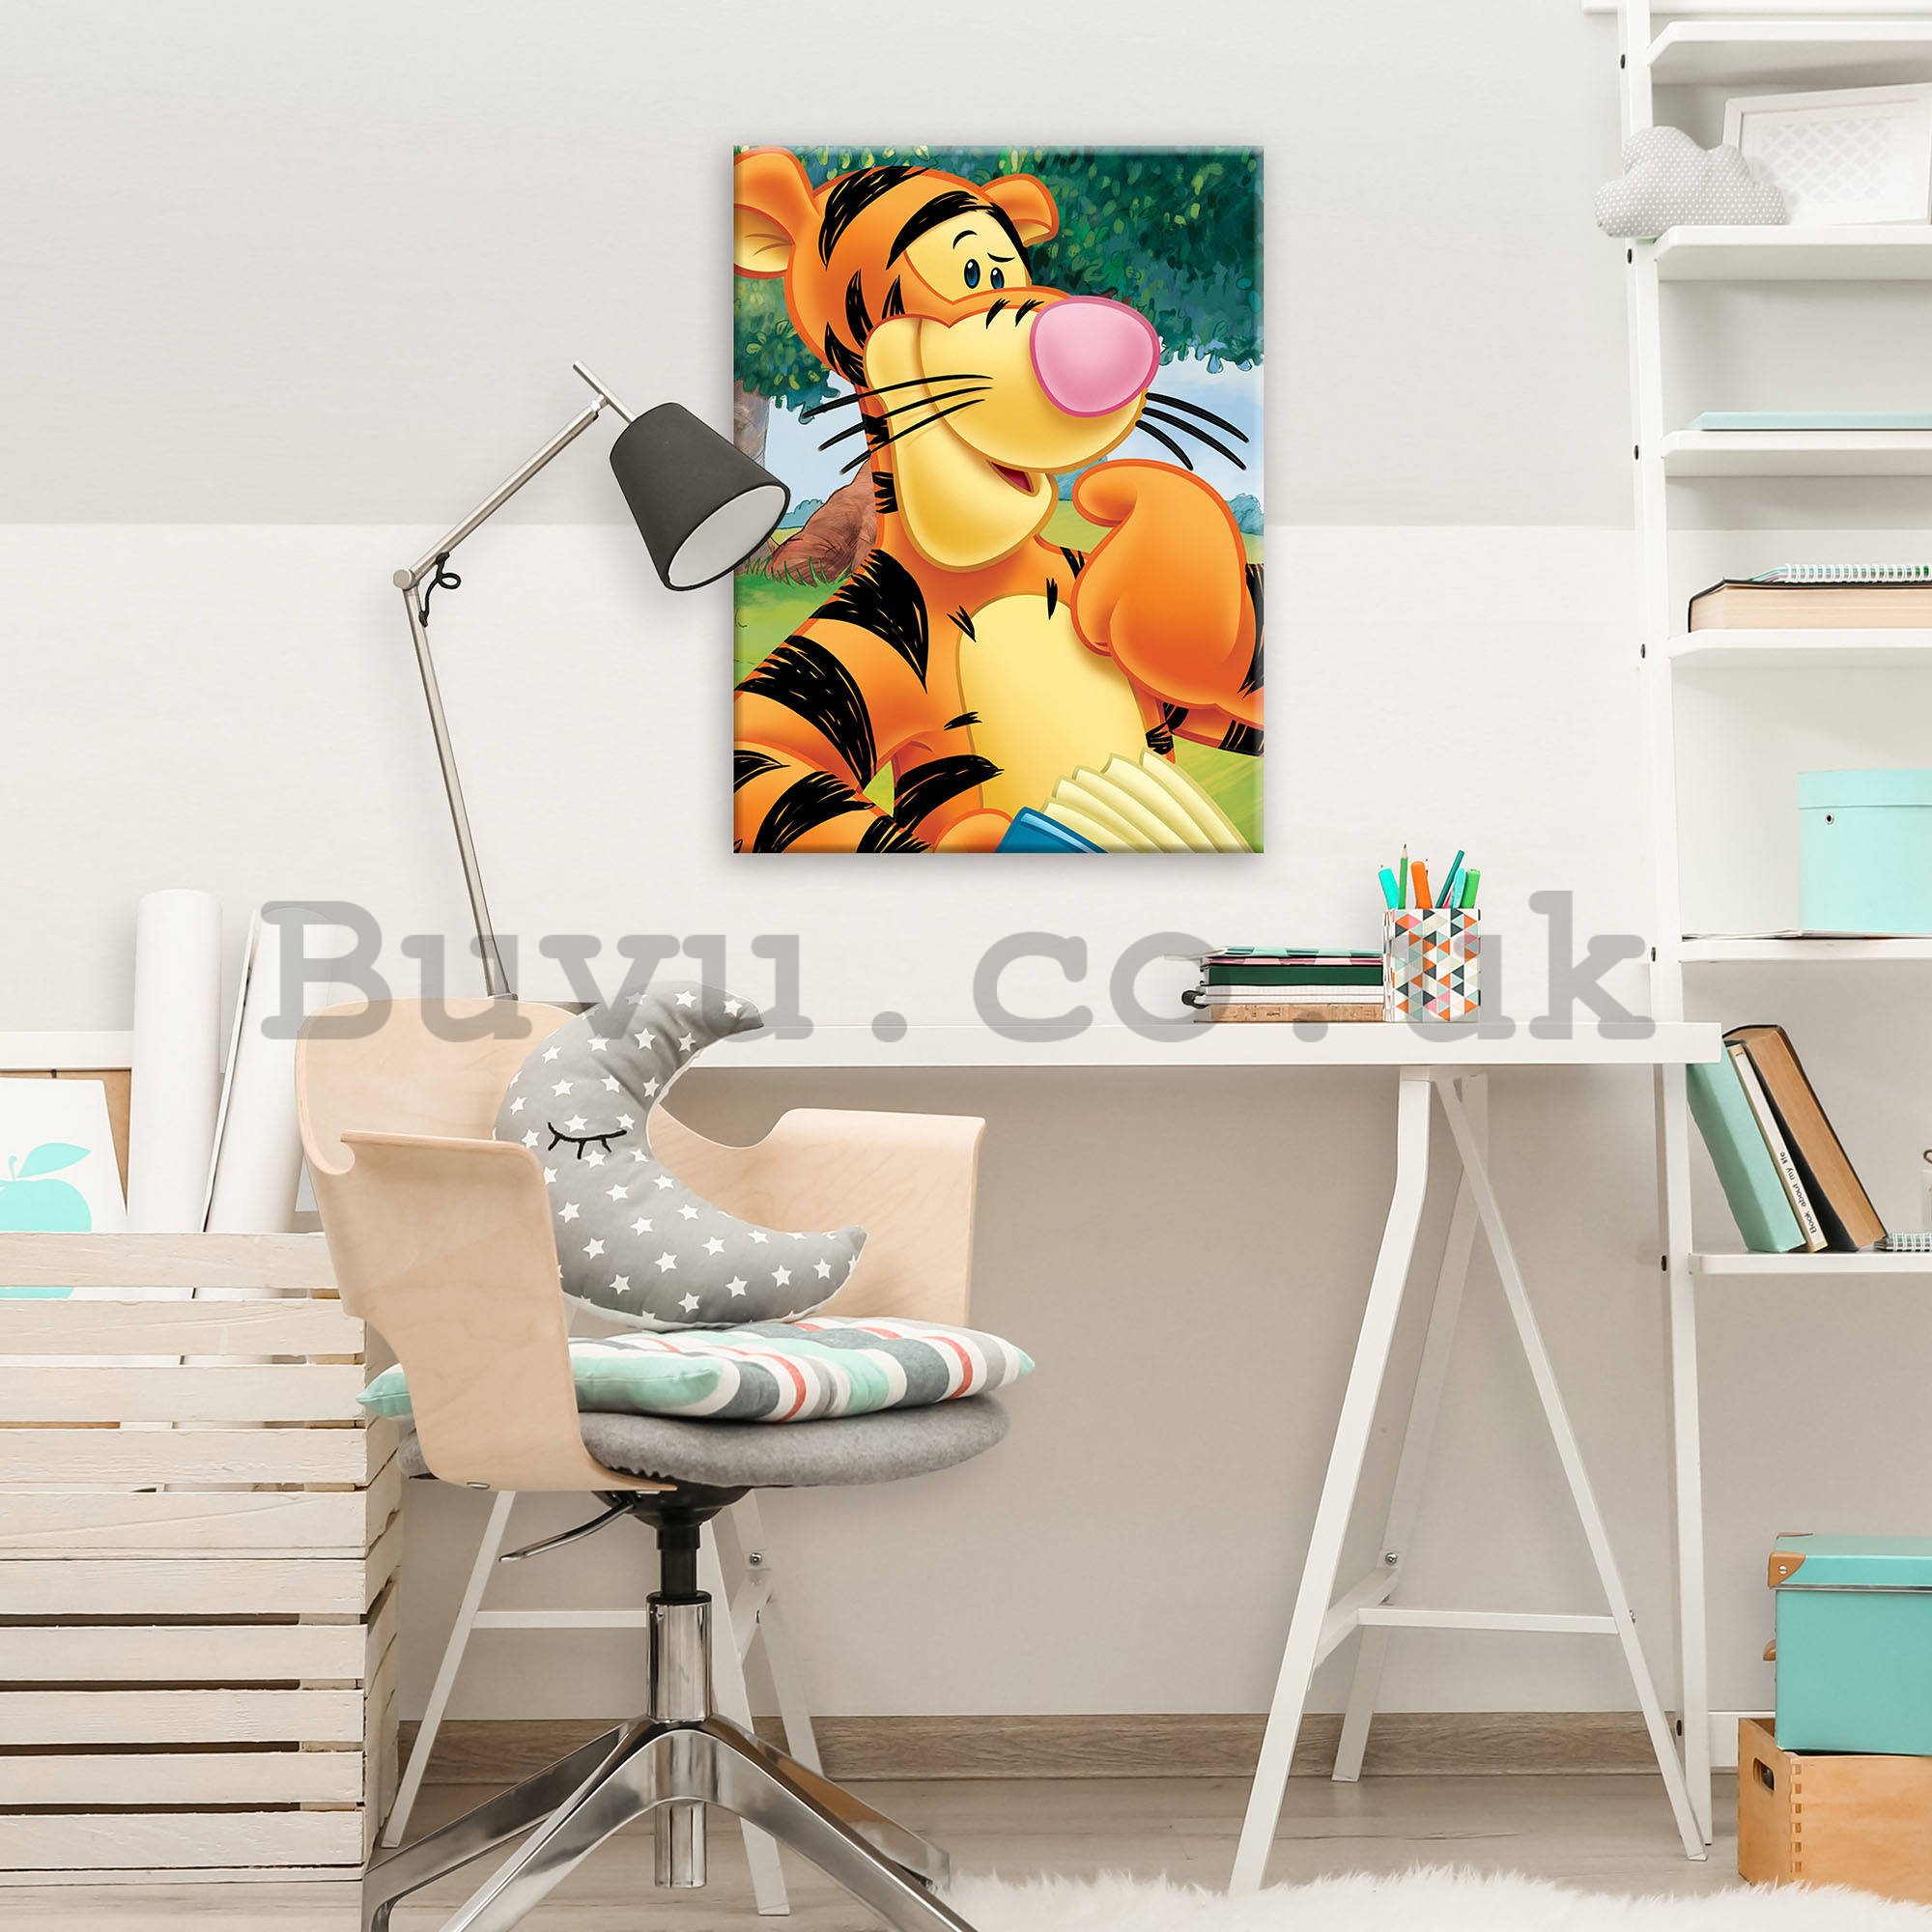 Painting on canvas: Winnie the Pooh (Tiger)  - 60x80 cm